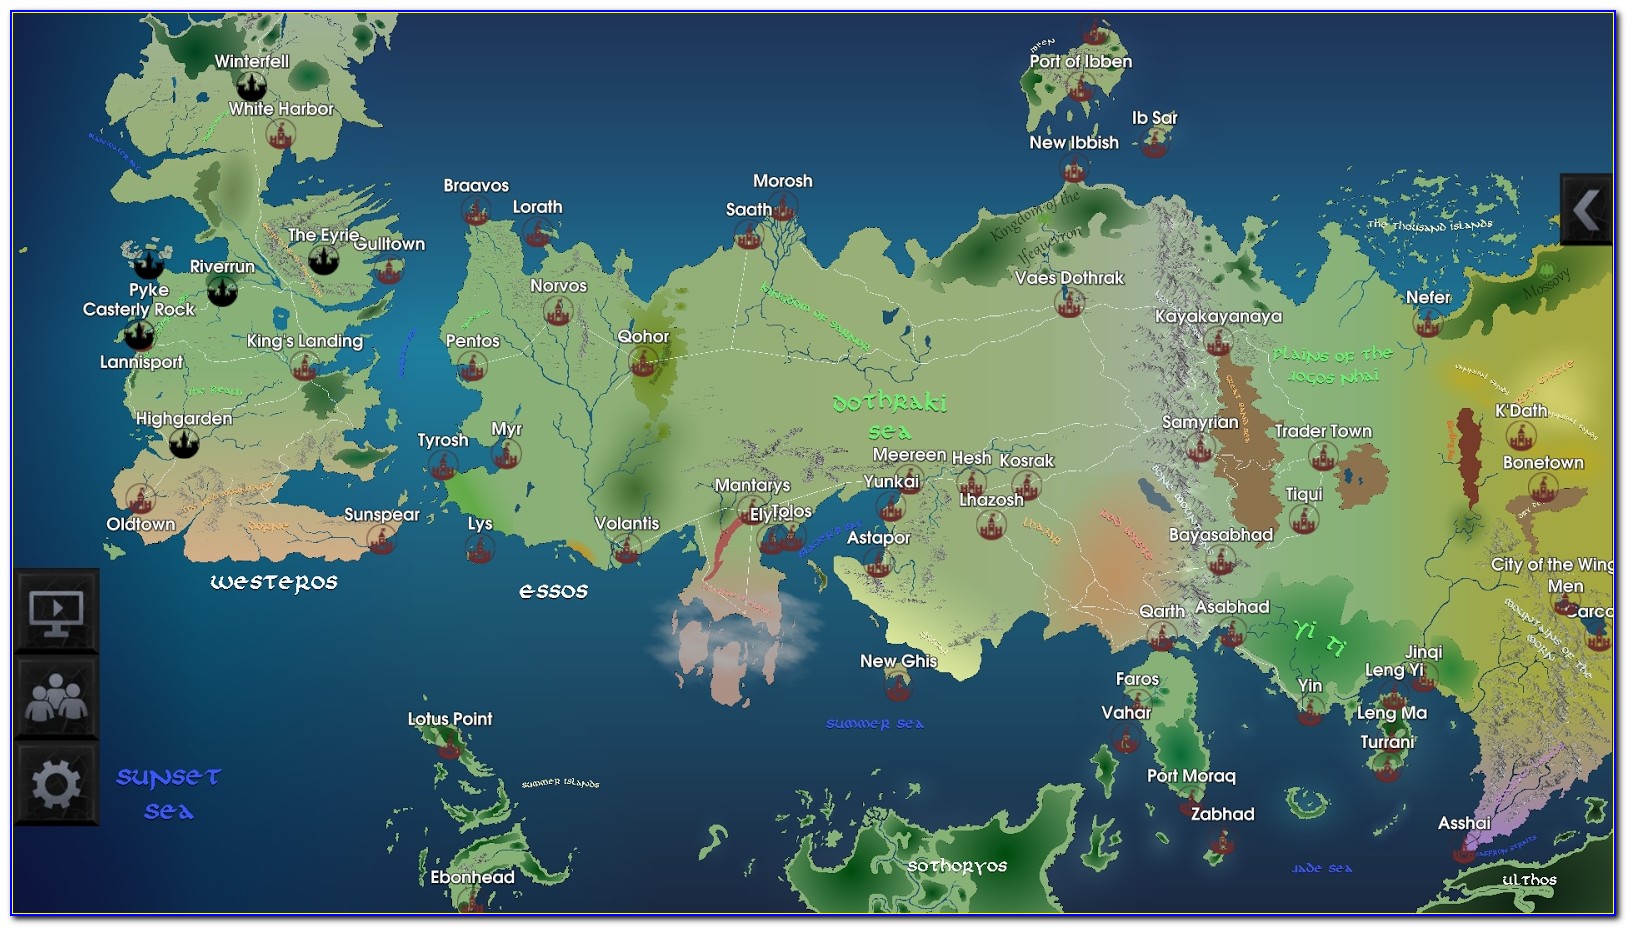 Full Map Of The Game Of Thrones World